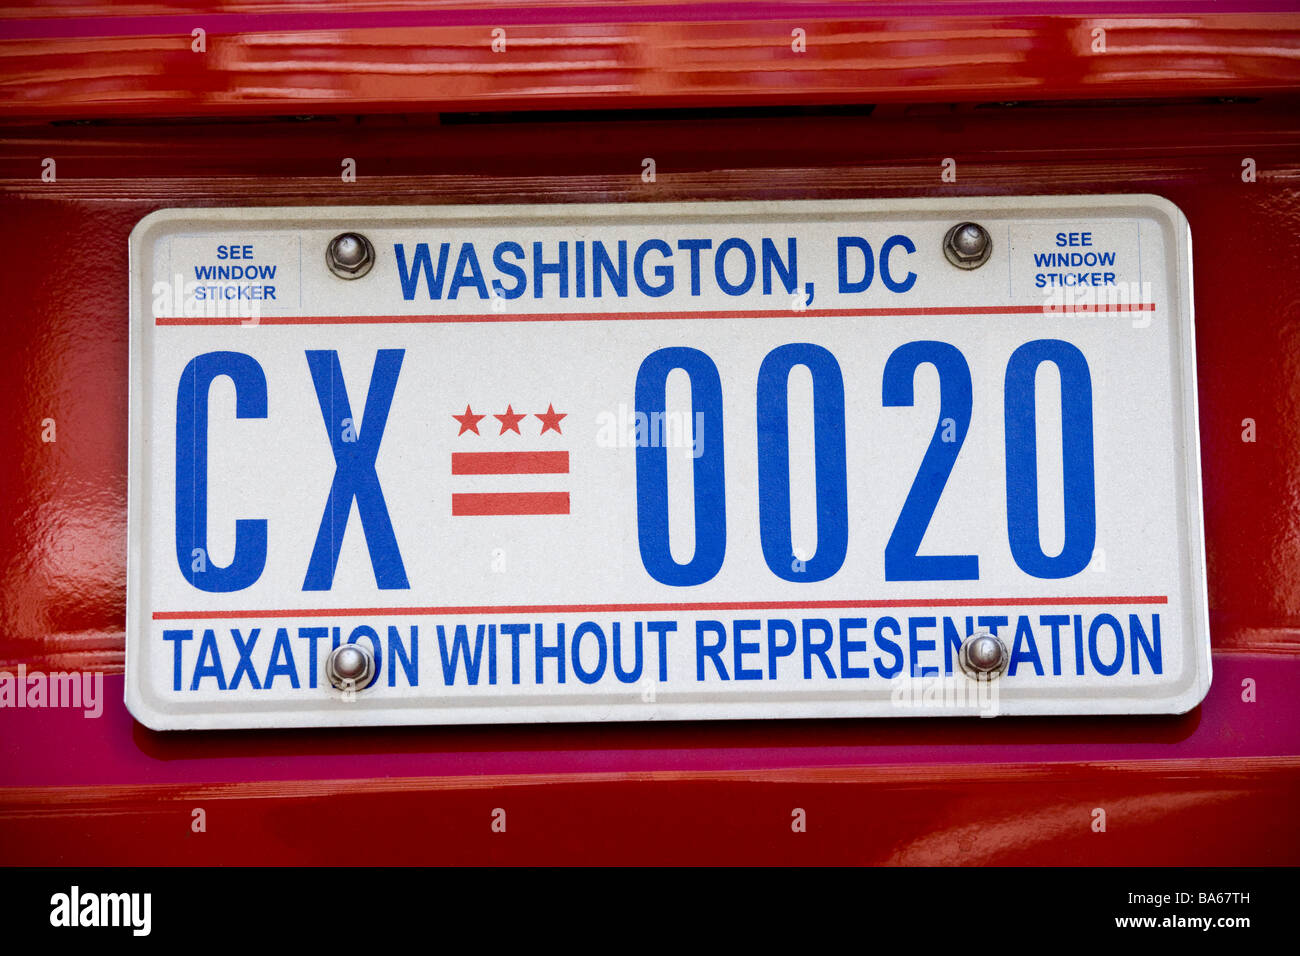 A Washington DC car license plate with the slogan: Taxation without representation. Stock Photo